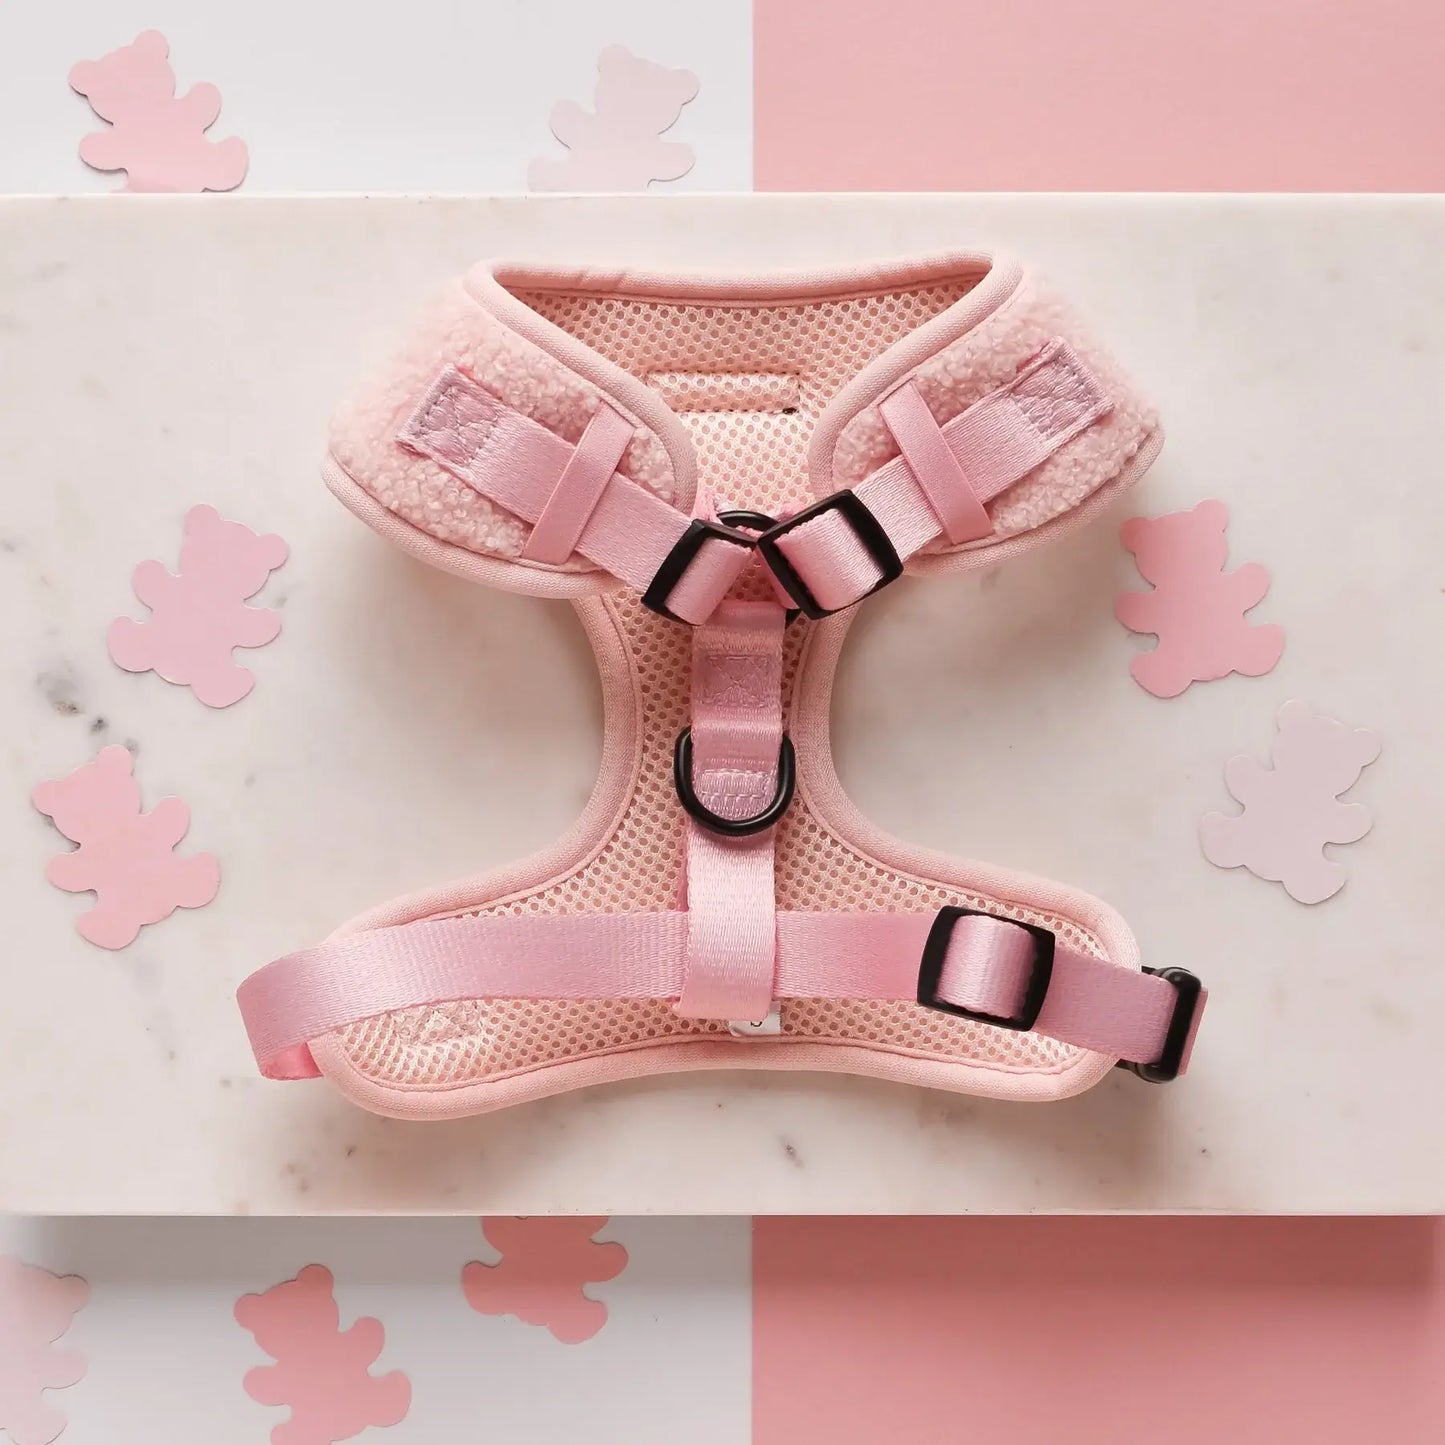 Cocopup London Love-A-Lot Teddy Adjustable Neck Harness (S)